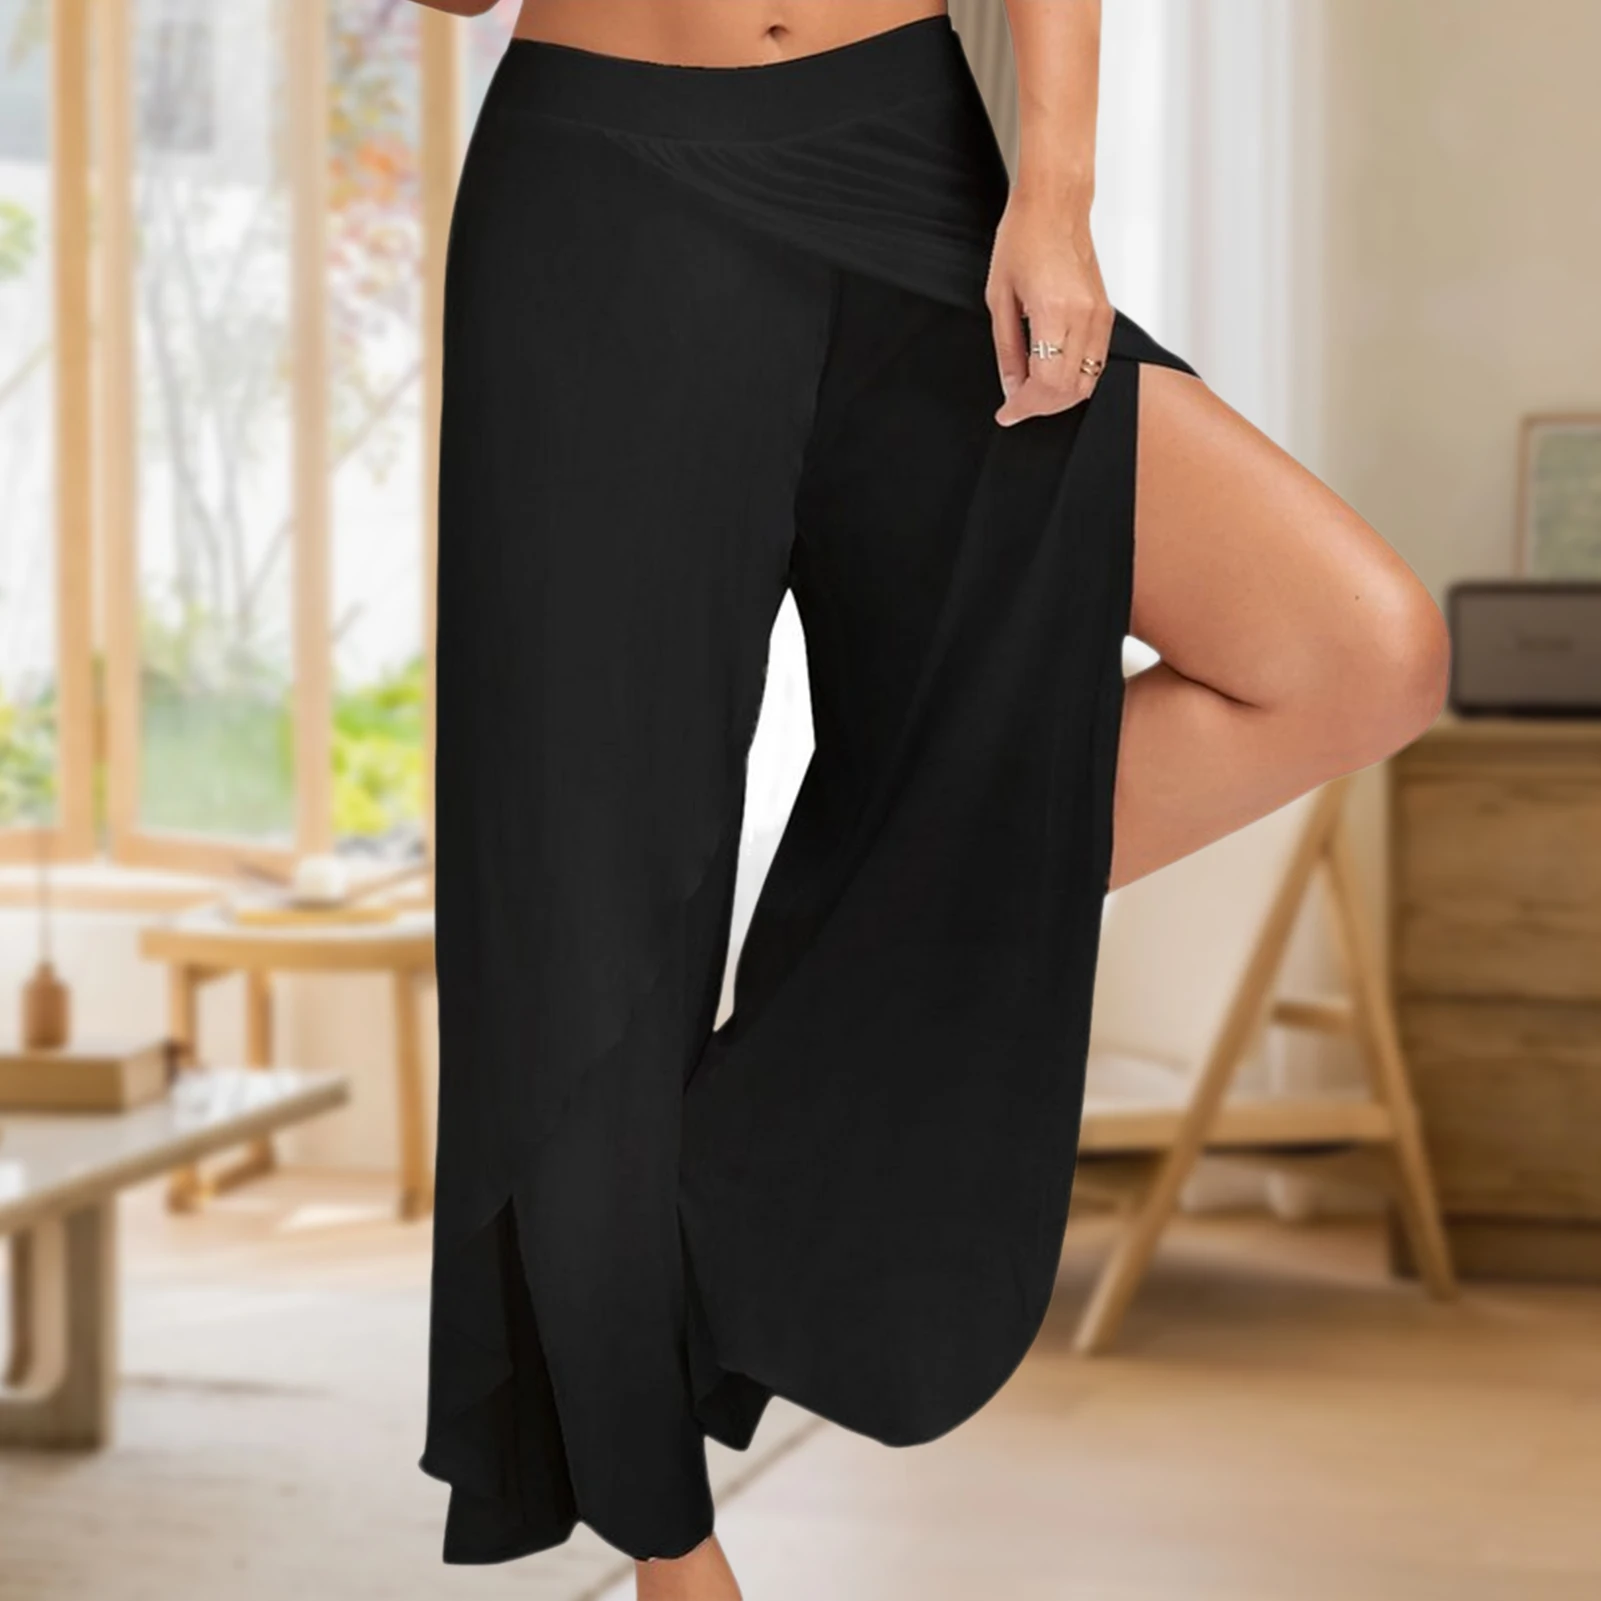 

Cotton Summer Pants Solid Color Women Basic Casual Pants Elastic Waisted Loose Fit Asymmetrical Side Slit Daily Outfit